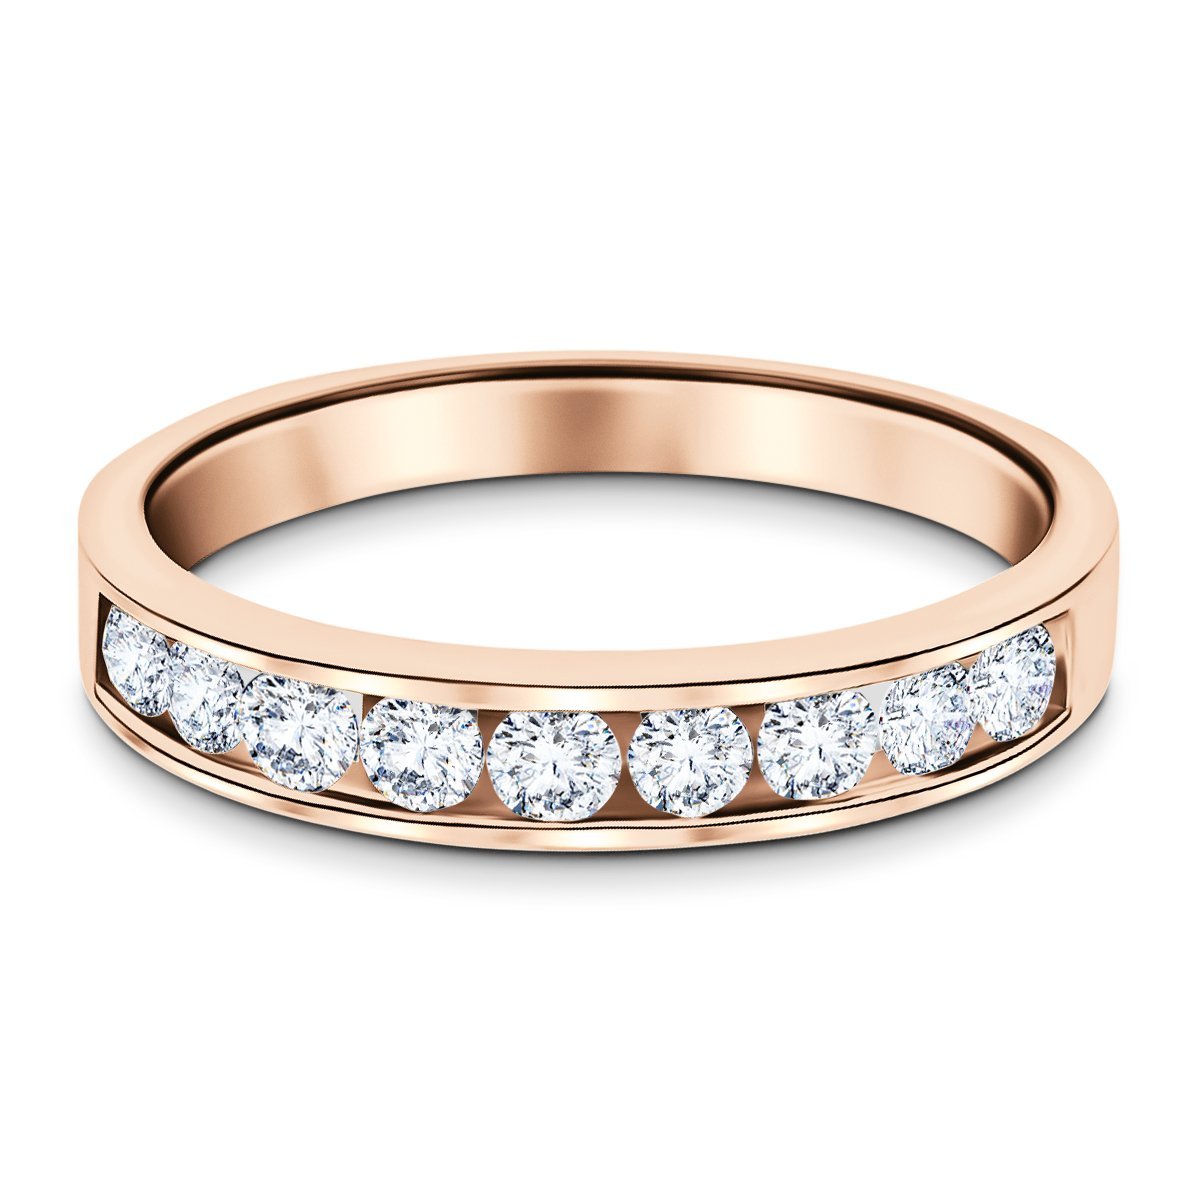 Channel Set Half Eternity Ring 0.50ct G/SI in 18k Rose Gold 3.4mm - All Diamond